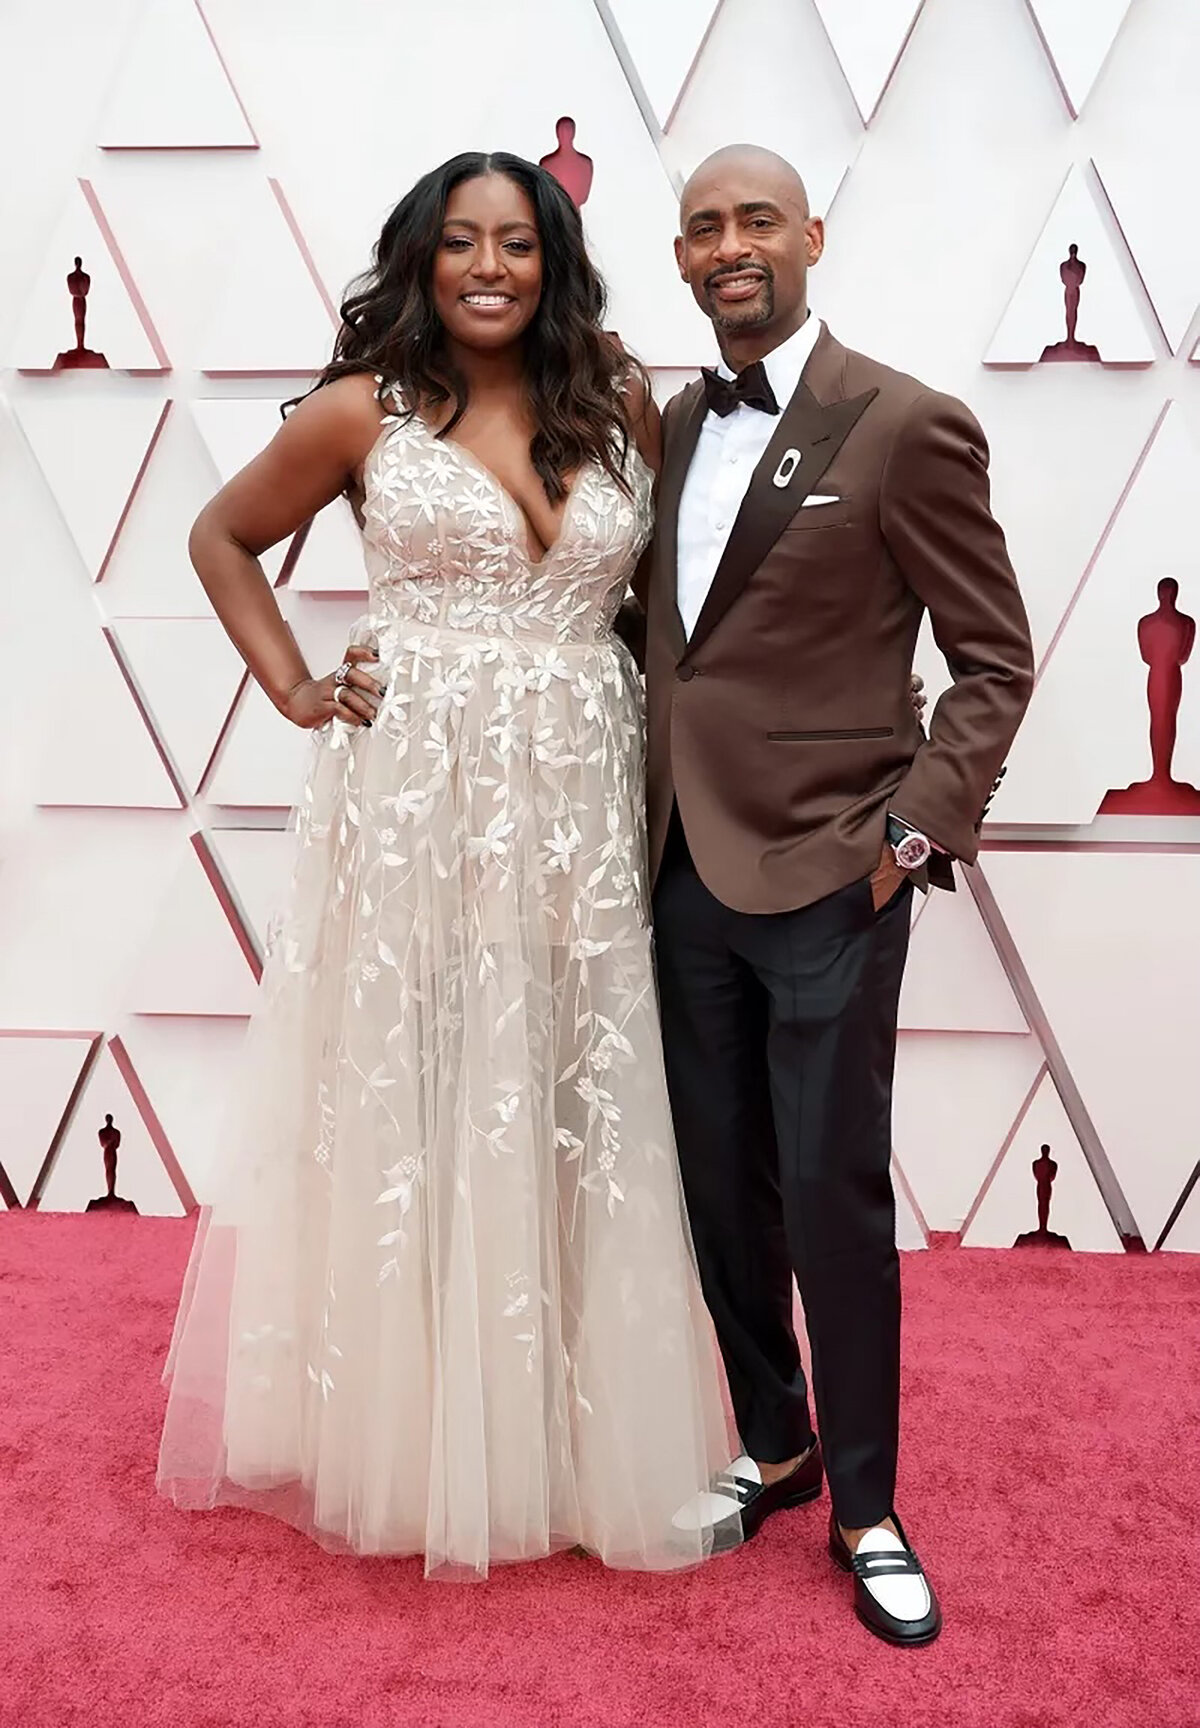 style-red-carpet-the-oscars-best-dressed-charles-king-producer-custom-tuxedo-personal-shopping-fashion-stylist-raina-silberstein